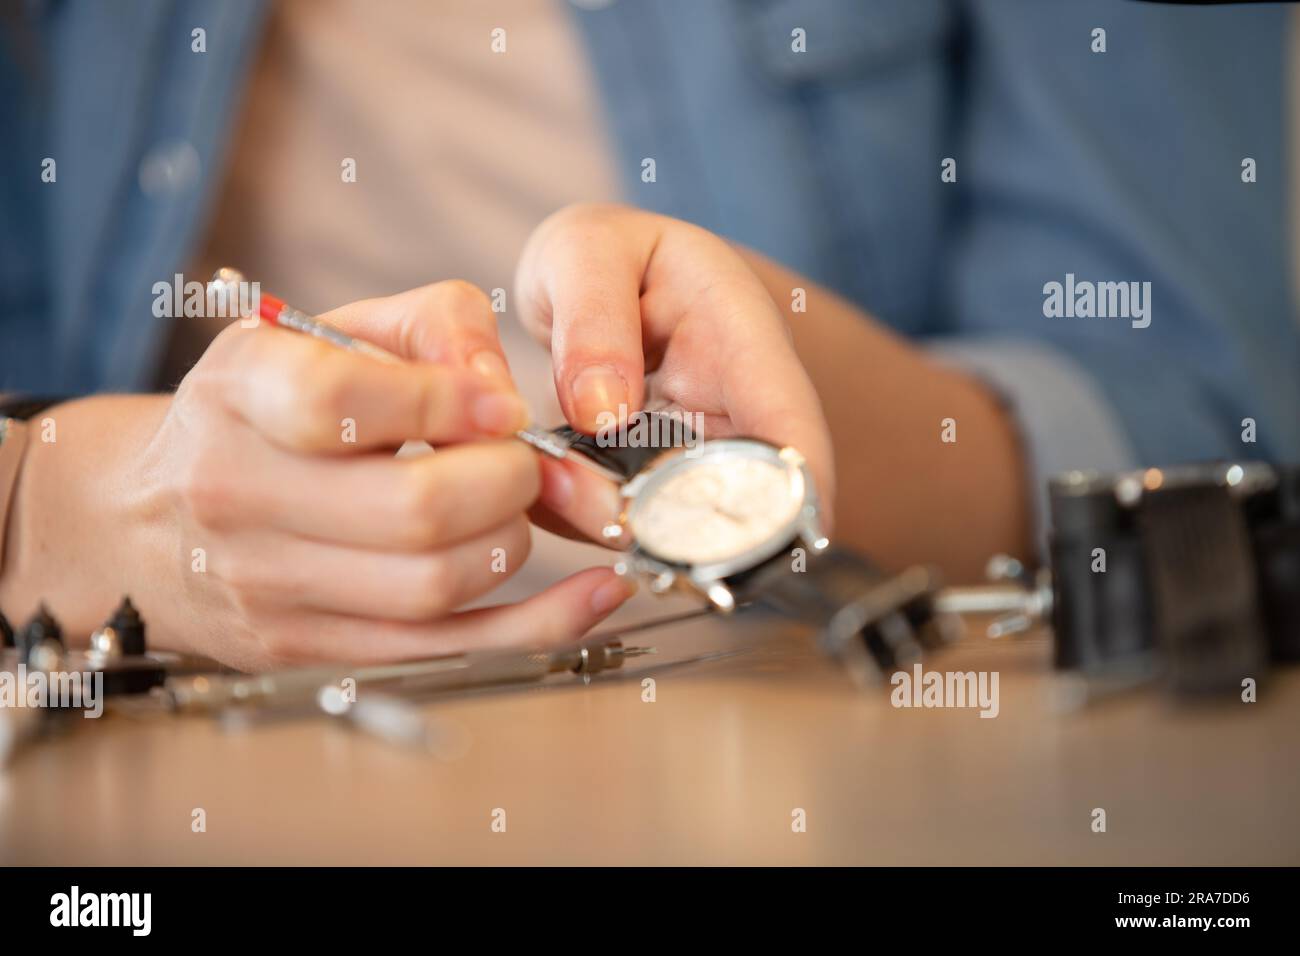 cropped image of watch being repaired with a precision screwdriver Stock Photo